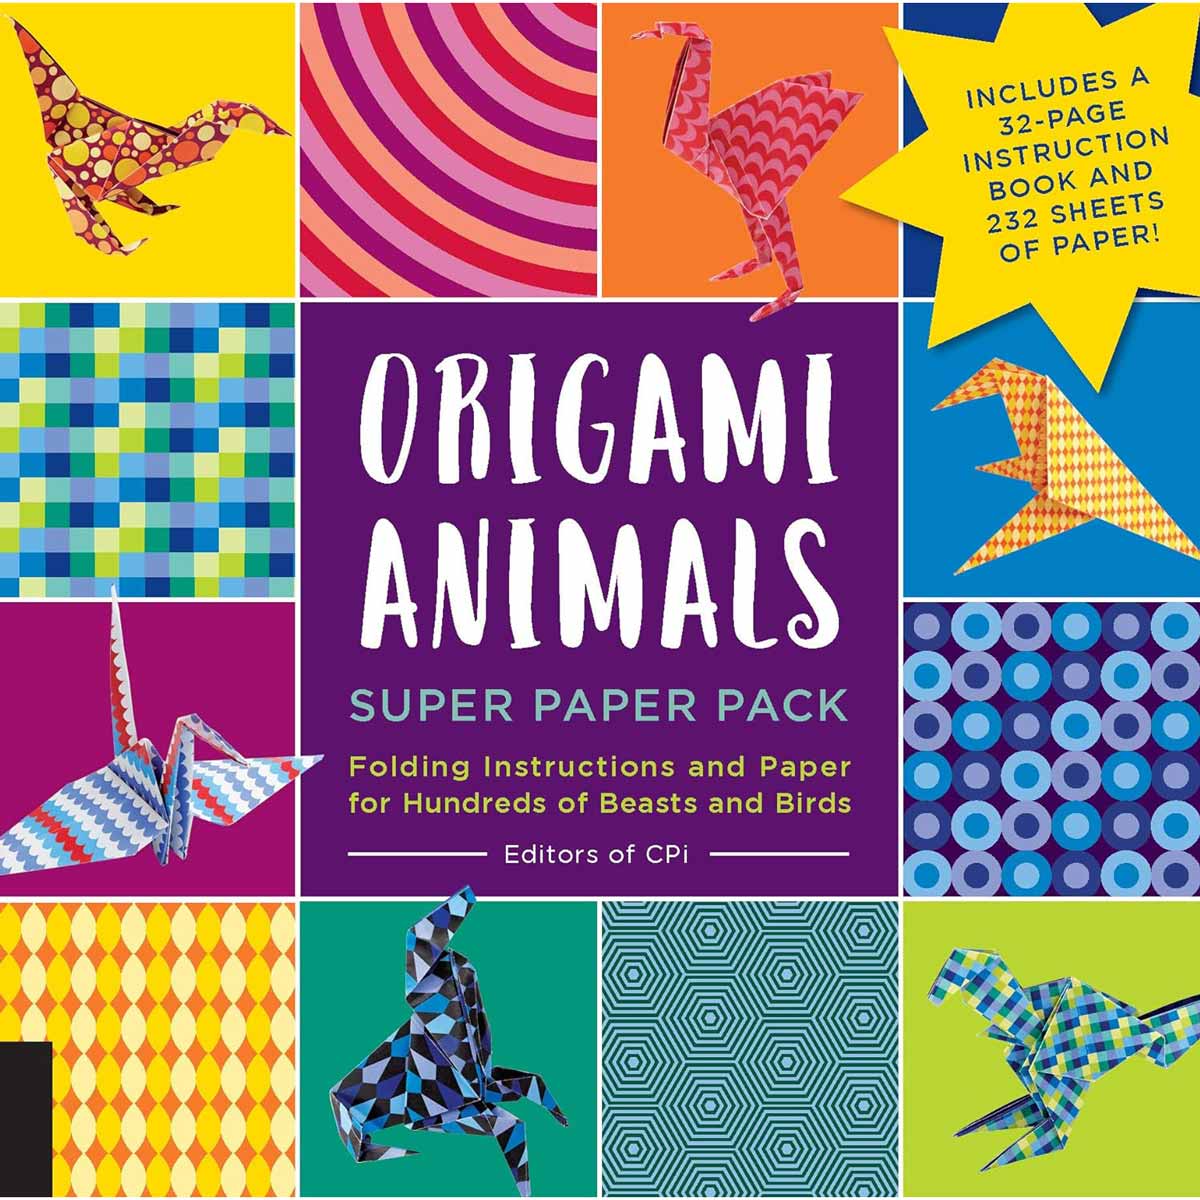 Walter Foster - Origami Animals Super Paper Pack